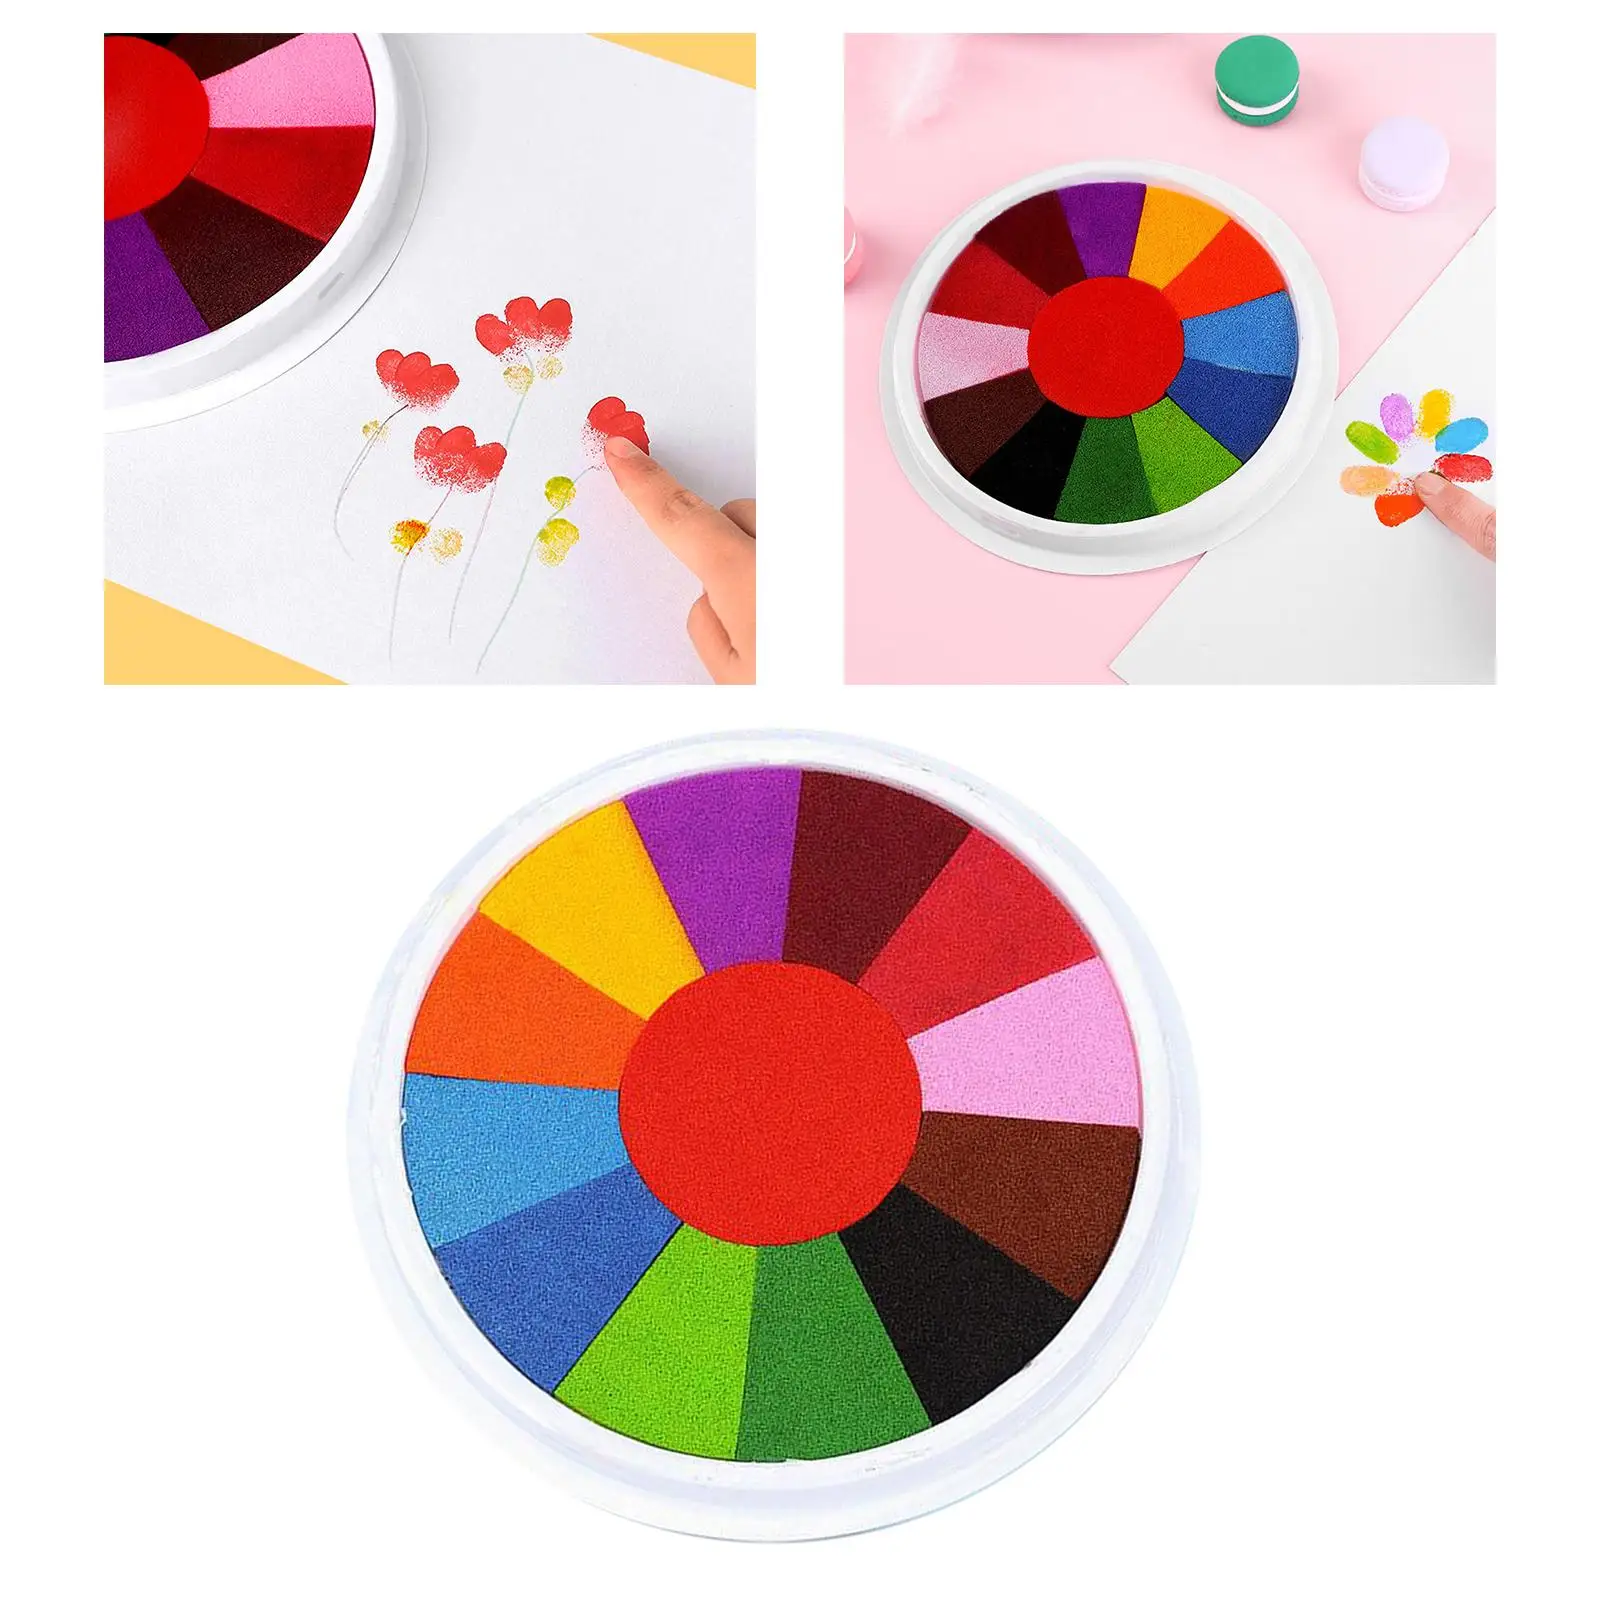 Craft Ink Pad For Rubber Stamps Pads DIY Printing Wood Fabric Paper